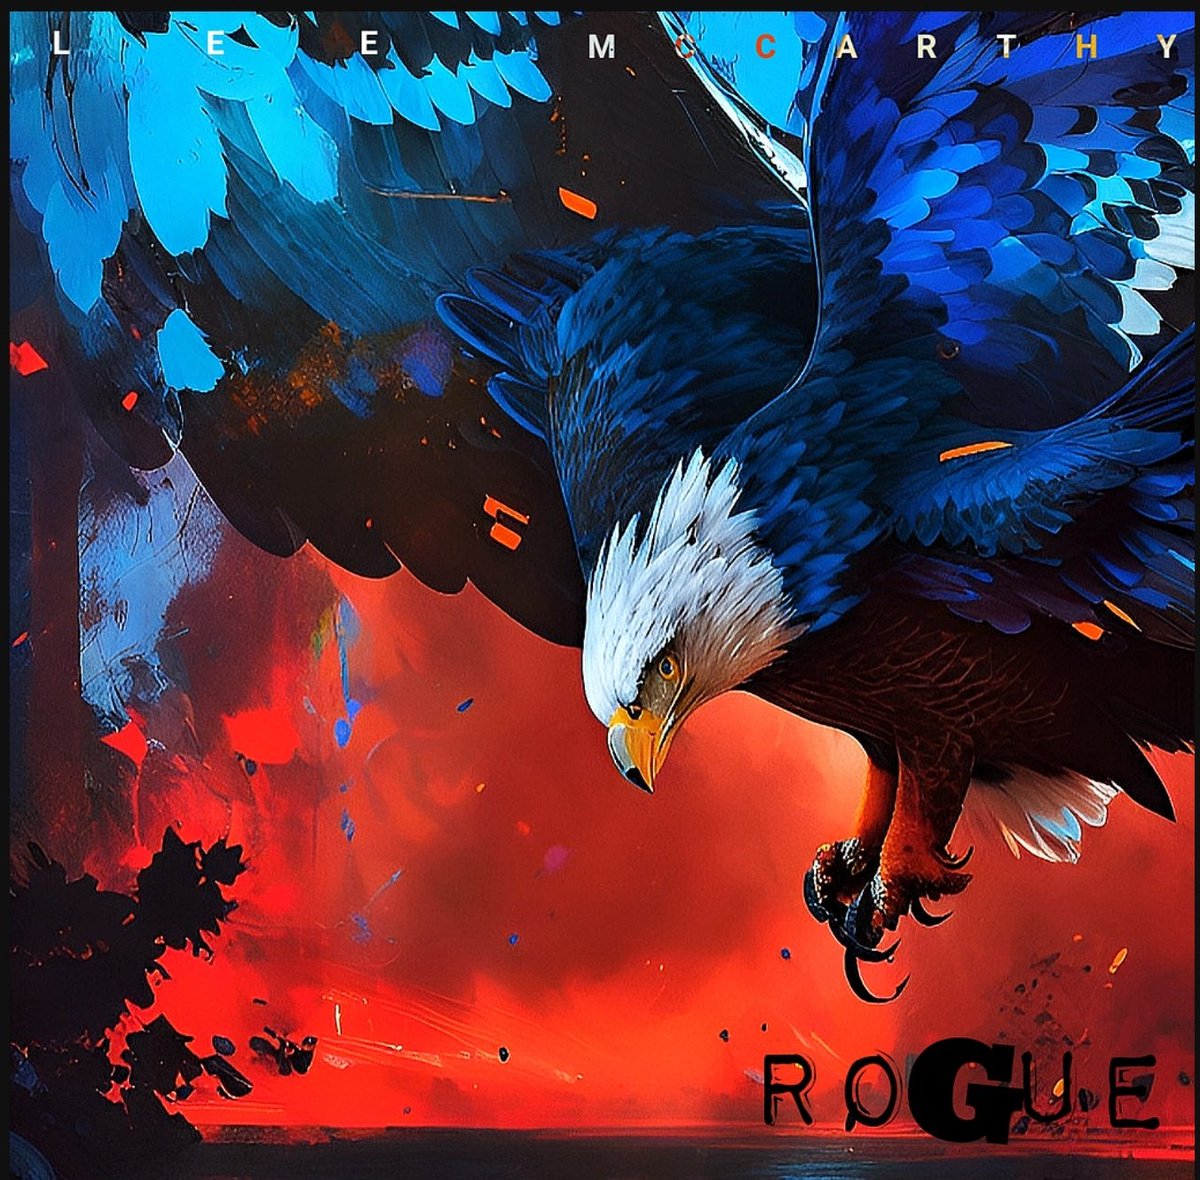 Happy #TEZOSTUESDAY 🎶

7 days left on this OE

Rogue - Eagle Eye EDITION 
5 tez
#NewMusicAlert #AIArtwork #Eagle #rockmusic
objkt.com/tokens/KT1Vg5s…